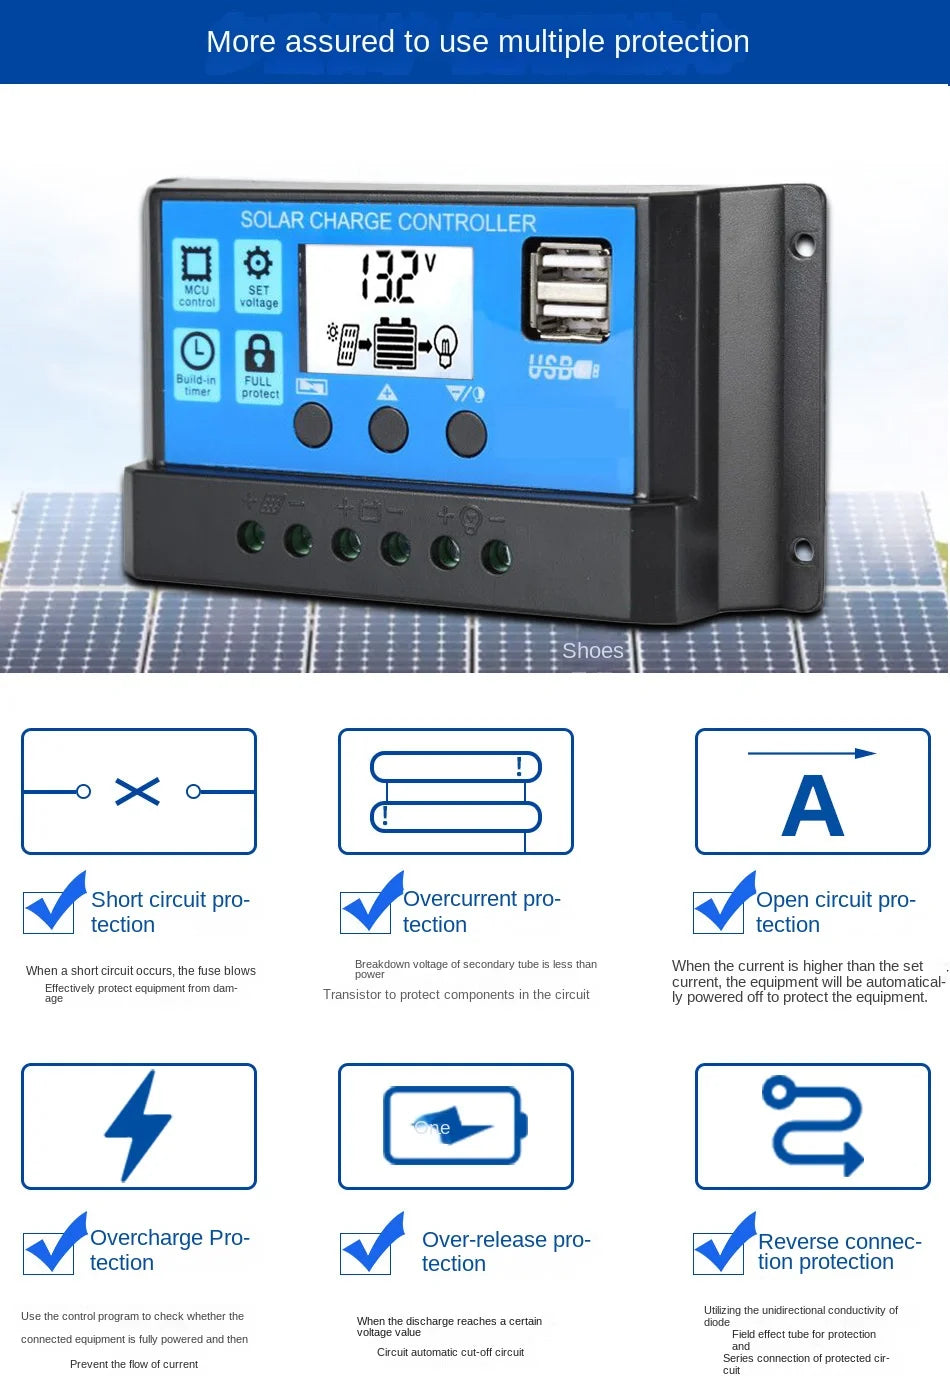 Solar Controller, Solar charge controller with multiple protections for safe and efficient charging.